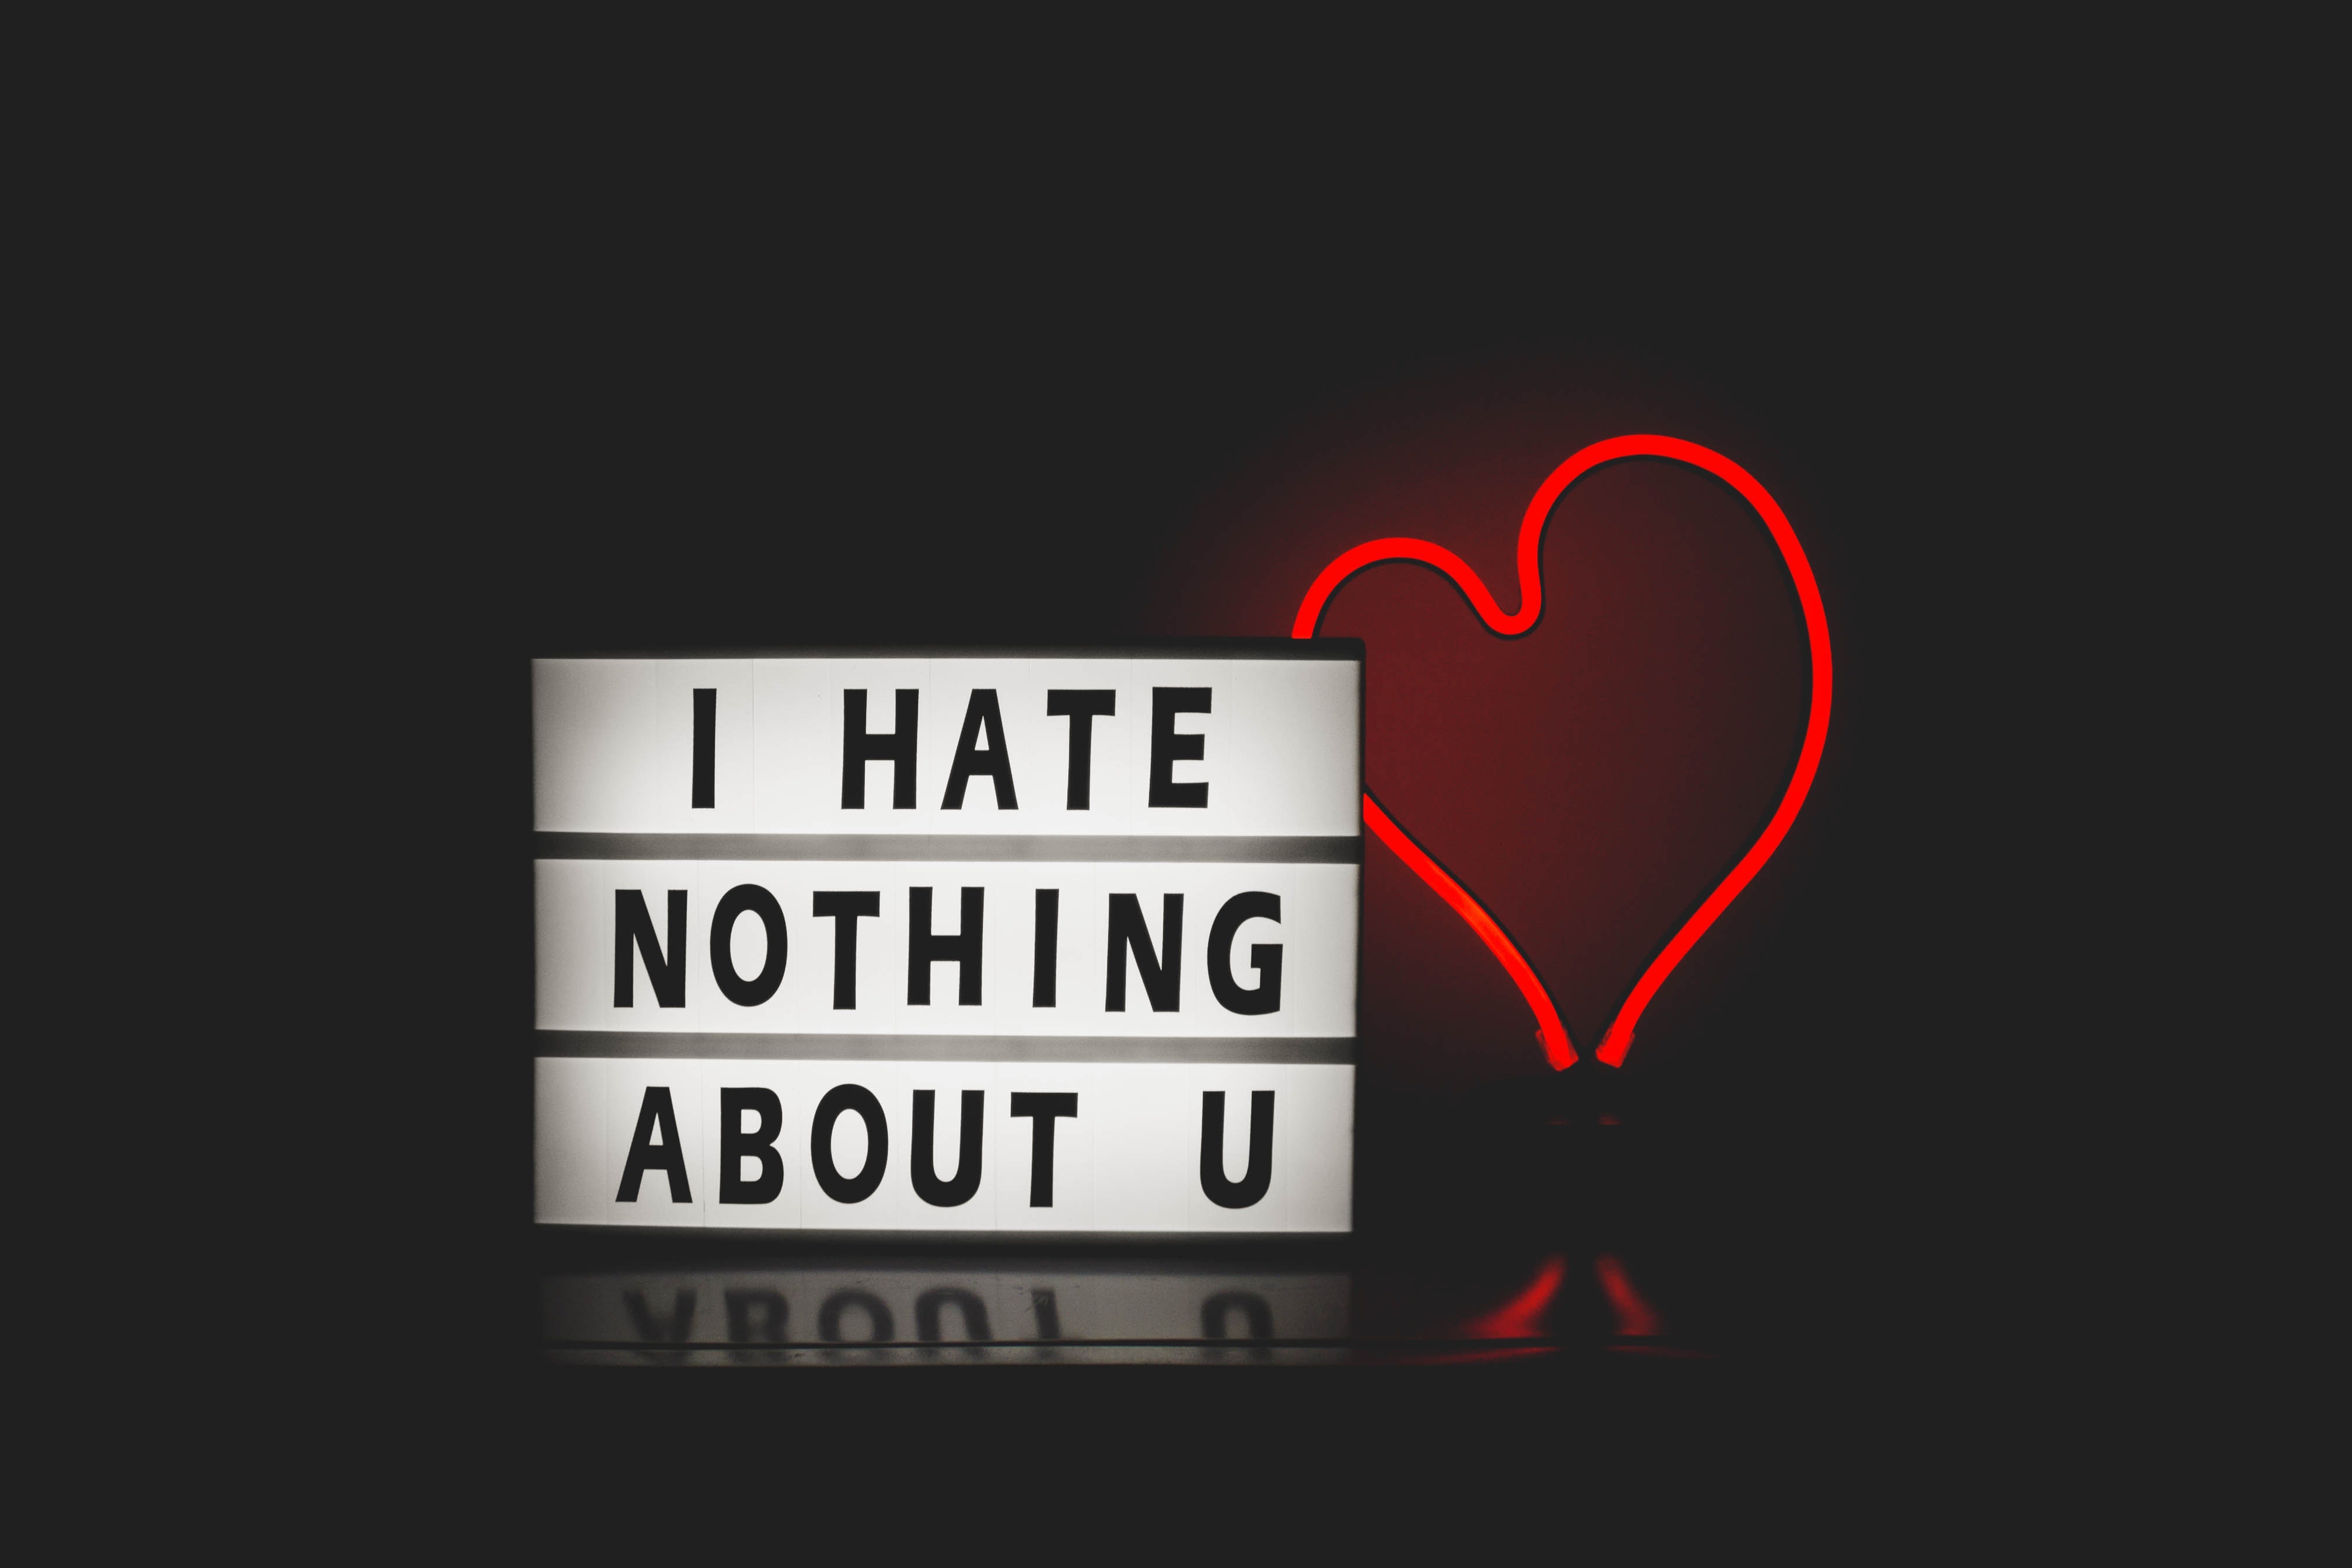 I Hate Nothing About You With Red Heart Light, Communication, People, Text, Technology, HQ Photo